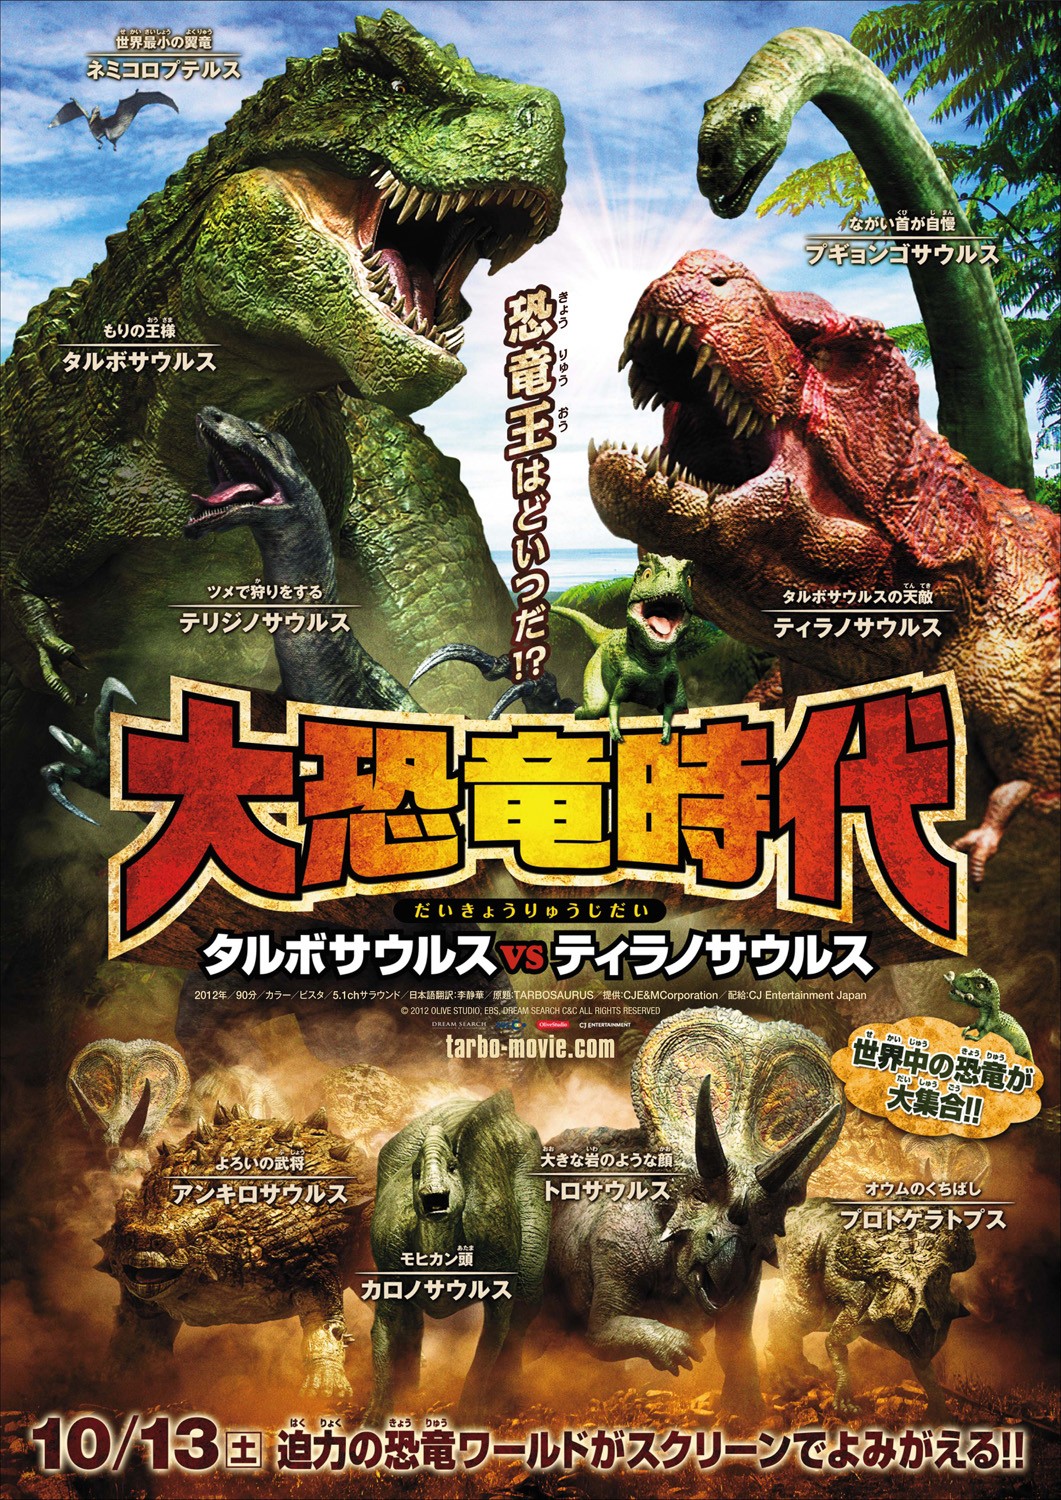 Extra Large Movie Poster Image for Tarbosaurus 3D 